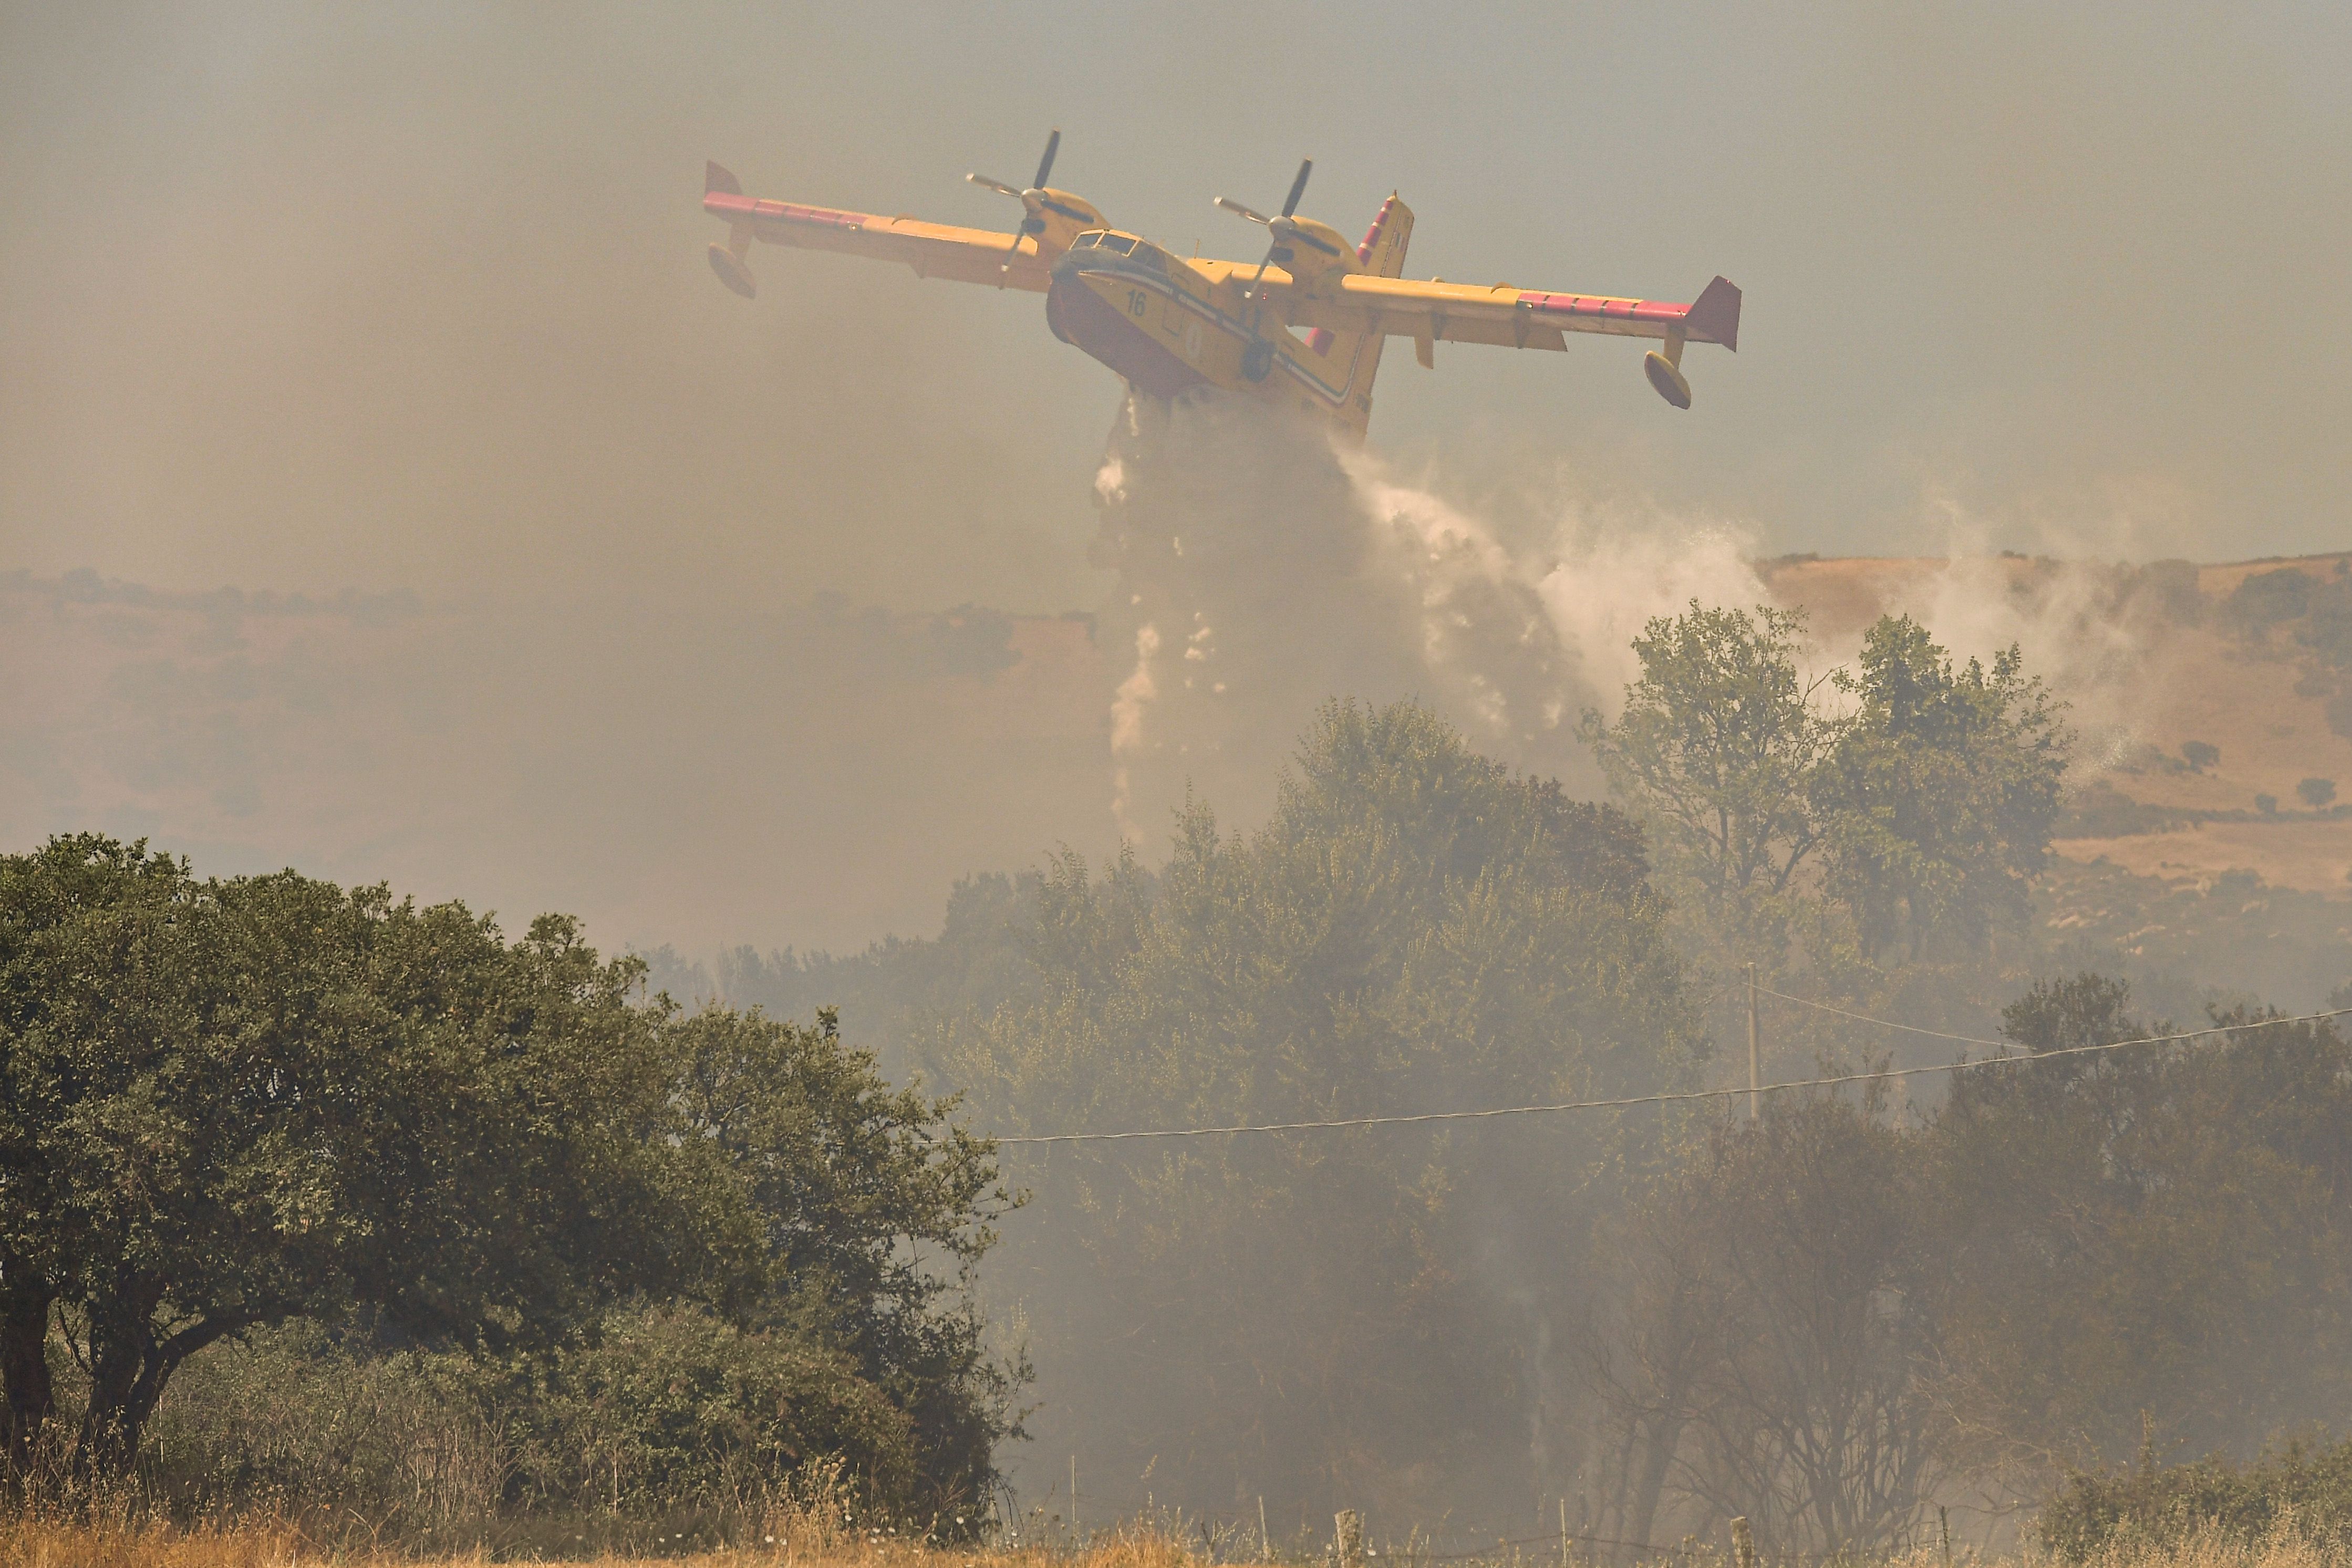 A tanker plane drops water on a fire that destroyed dozens of acres of land in Sassari province today on July 11, 2022 in Aggius, Sassari, Italy. 